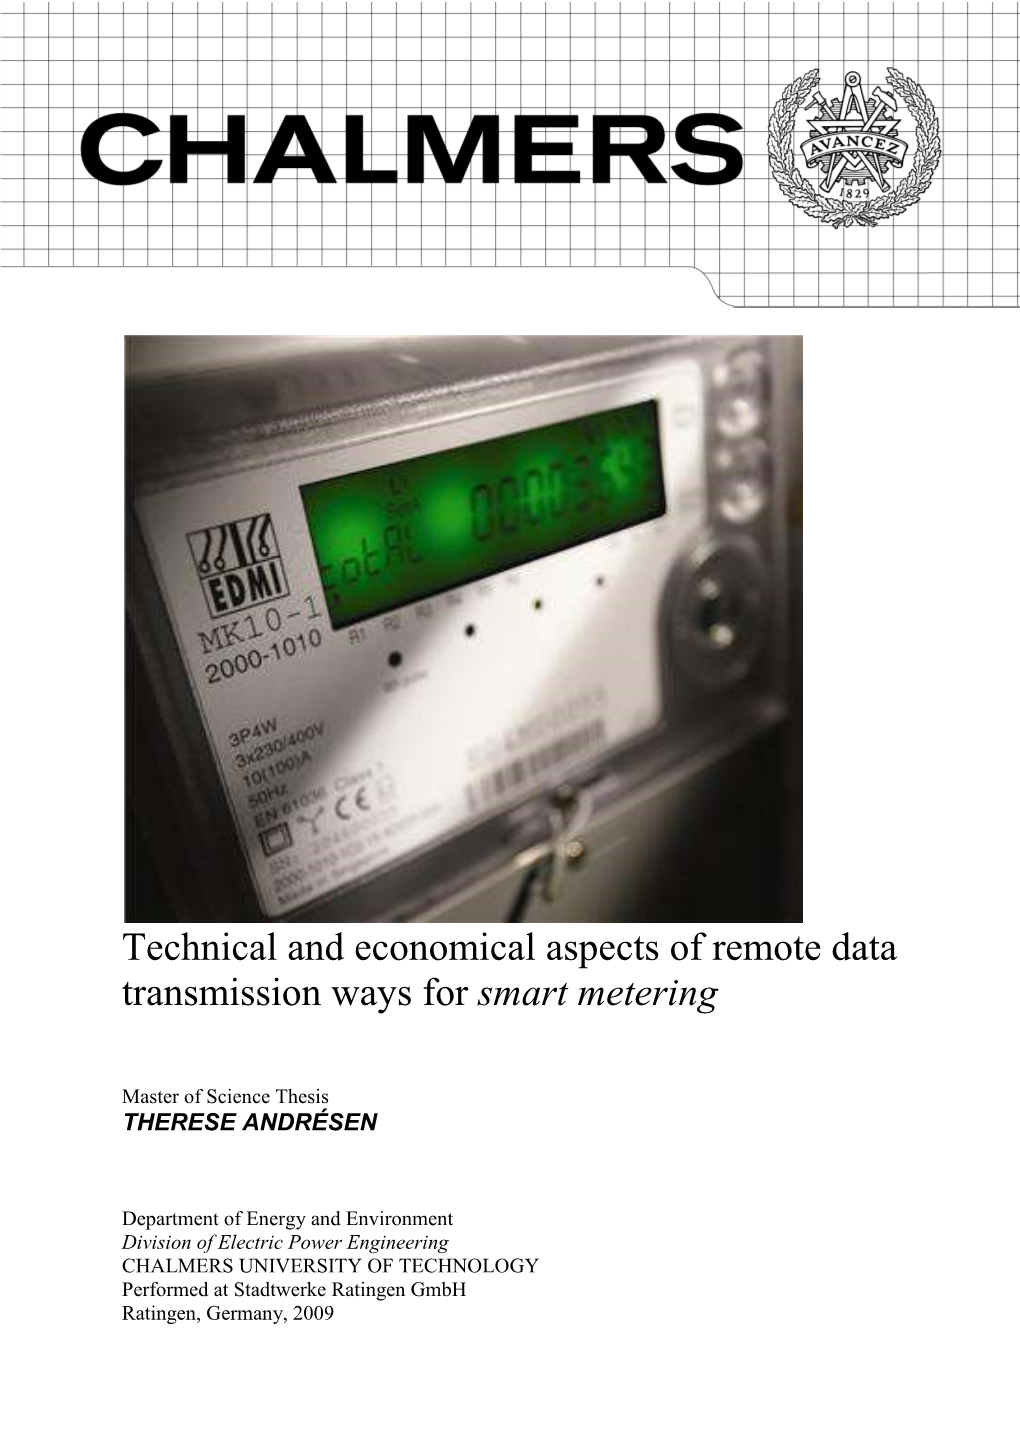 Technical and Economical Aspects of Remote Data Transmission Ways for Smart Metering